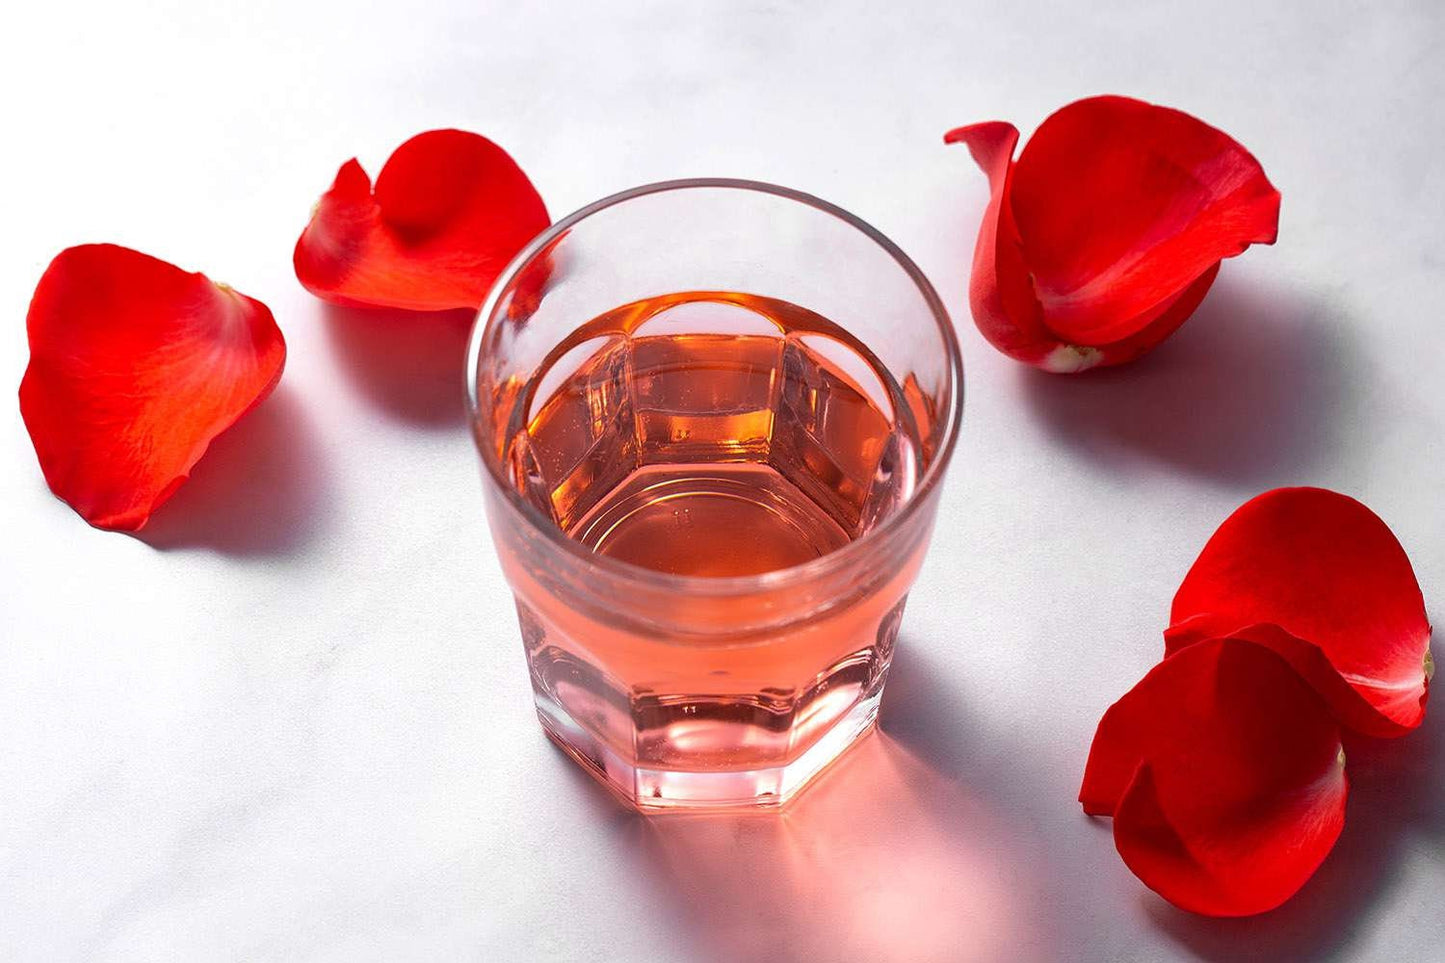 Wholesale/Private Label Rose Oil or Water